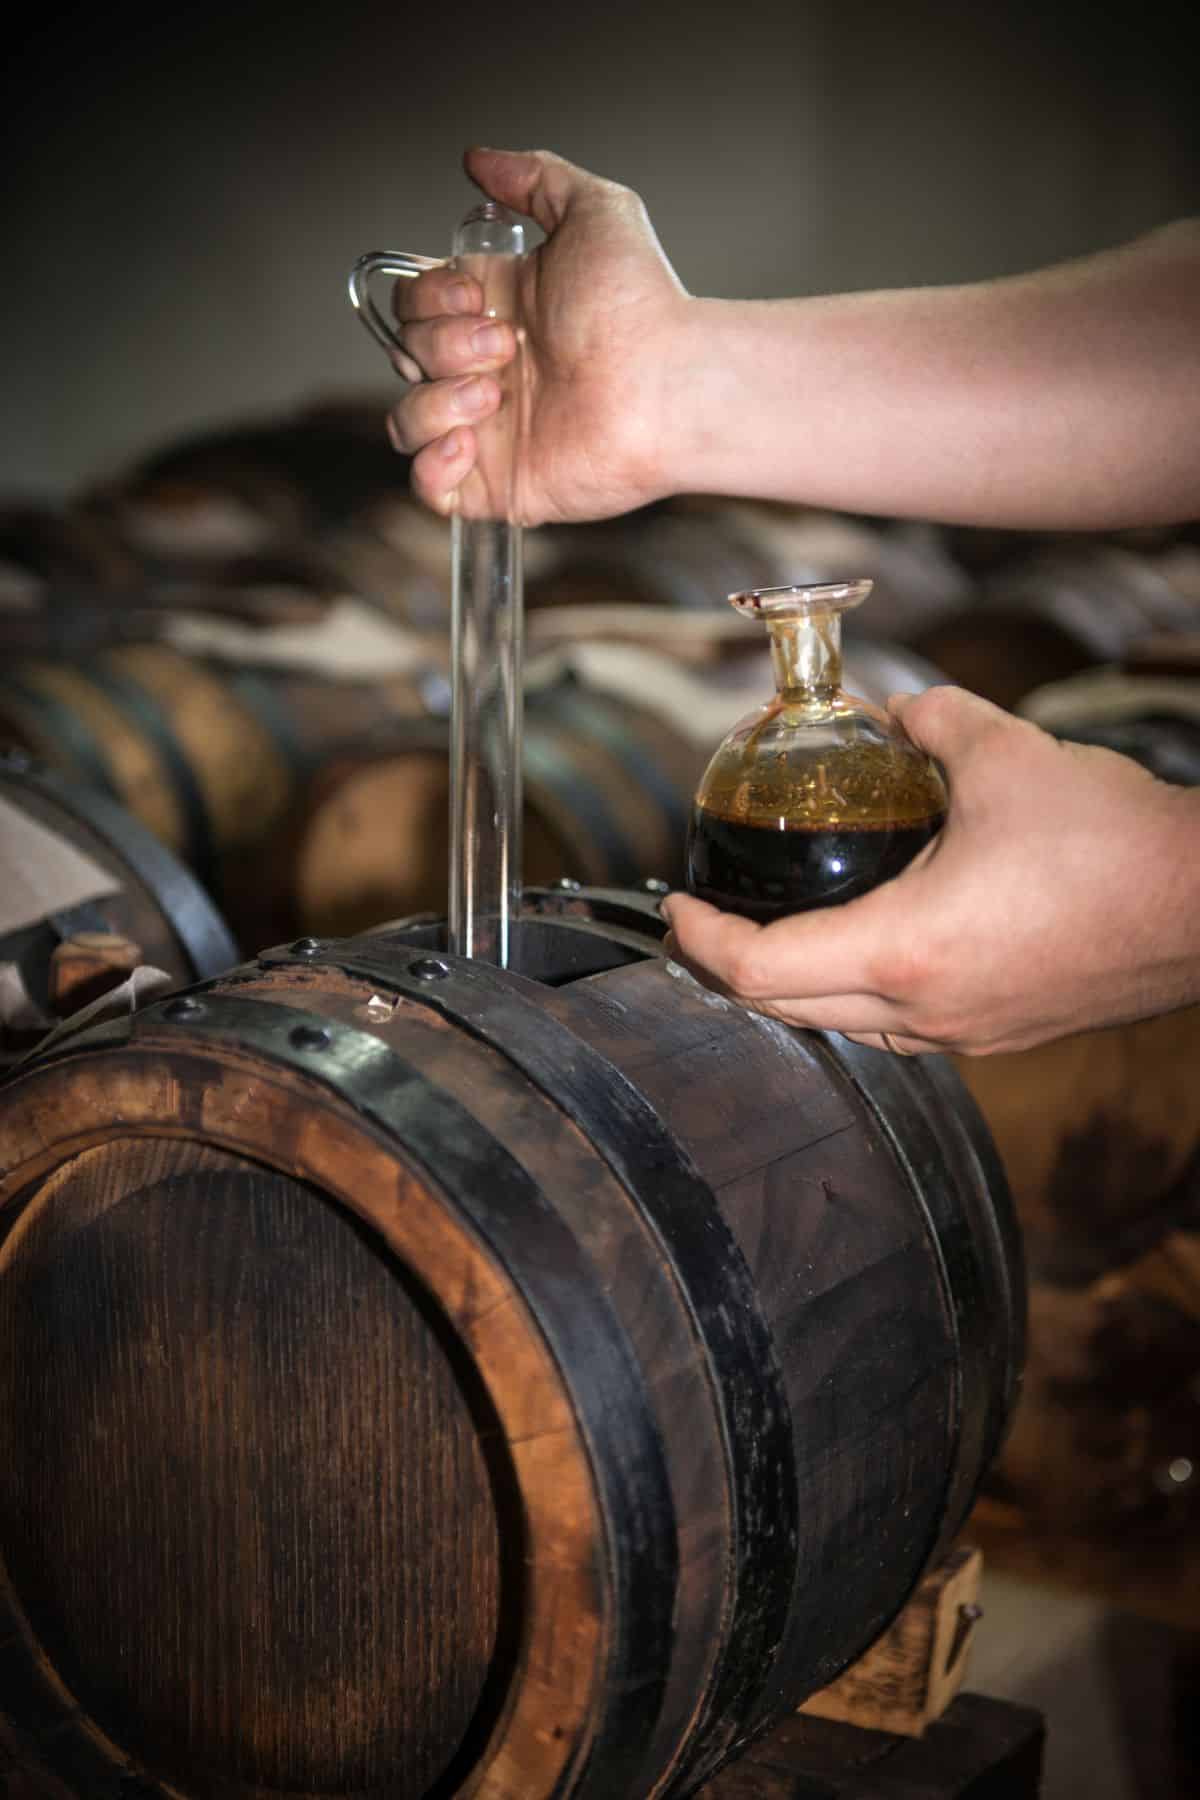 Taking balsamic vinegar from the cask where it is aged.